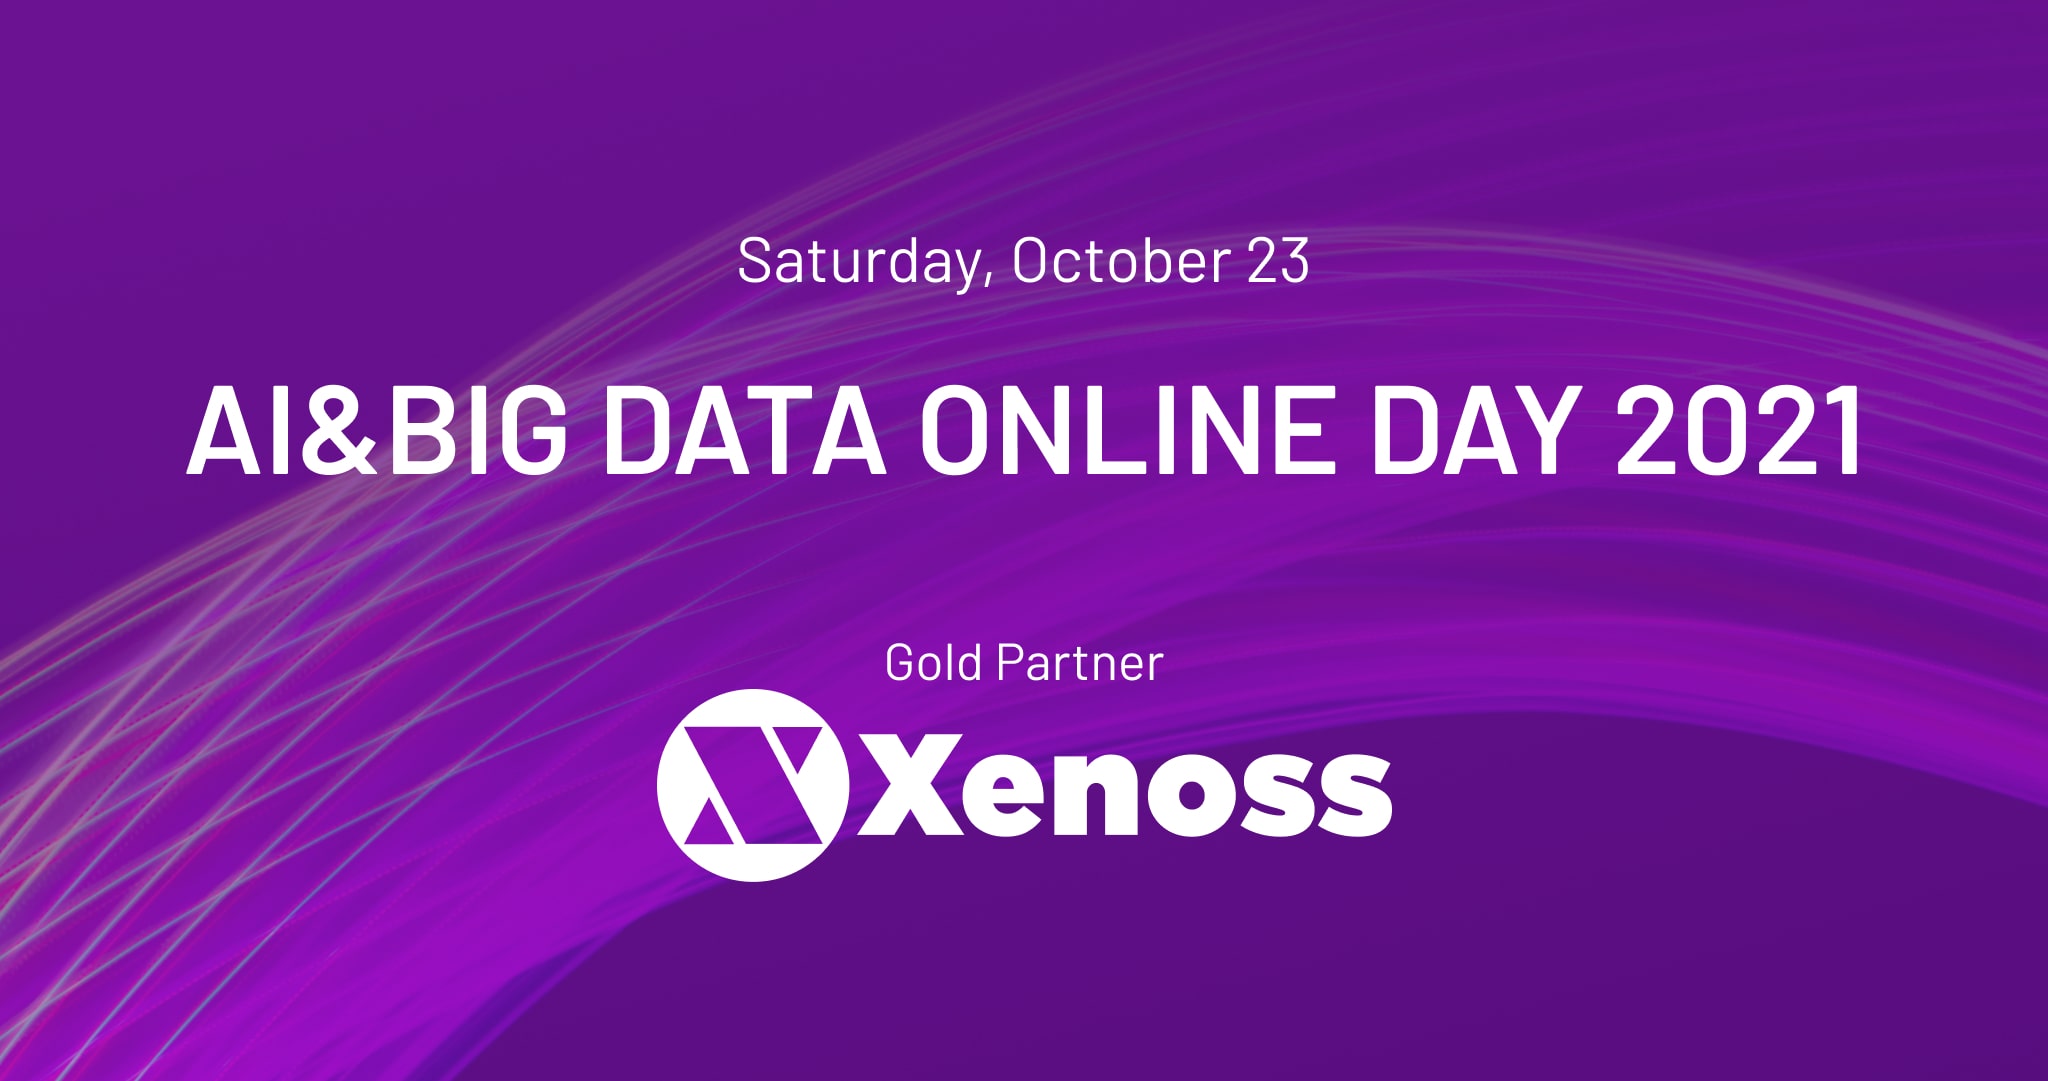 Xenoss Is The Sponsor of AI & Big Data Online Day 2021 Conference